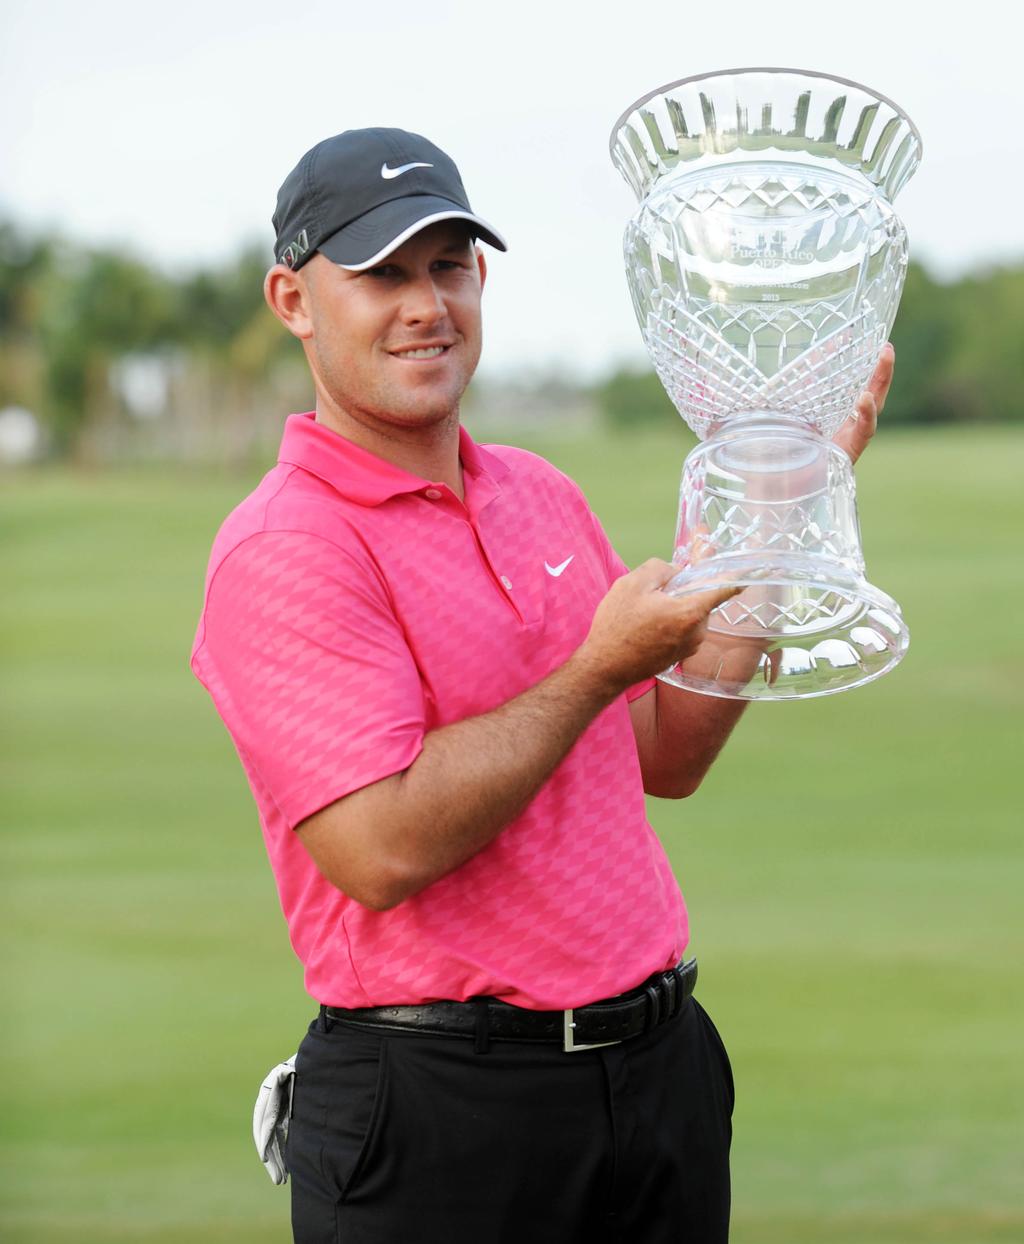 2013 Puerto Rico Open - Recap Scott Brown Wins the PR Open Río Grande, PR (March 10, 2012) - Scott Brown calmly made a four-foot putt on the 18th hole at Trump International Golf Club to